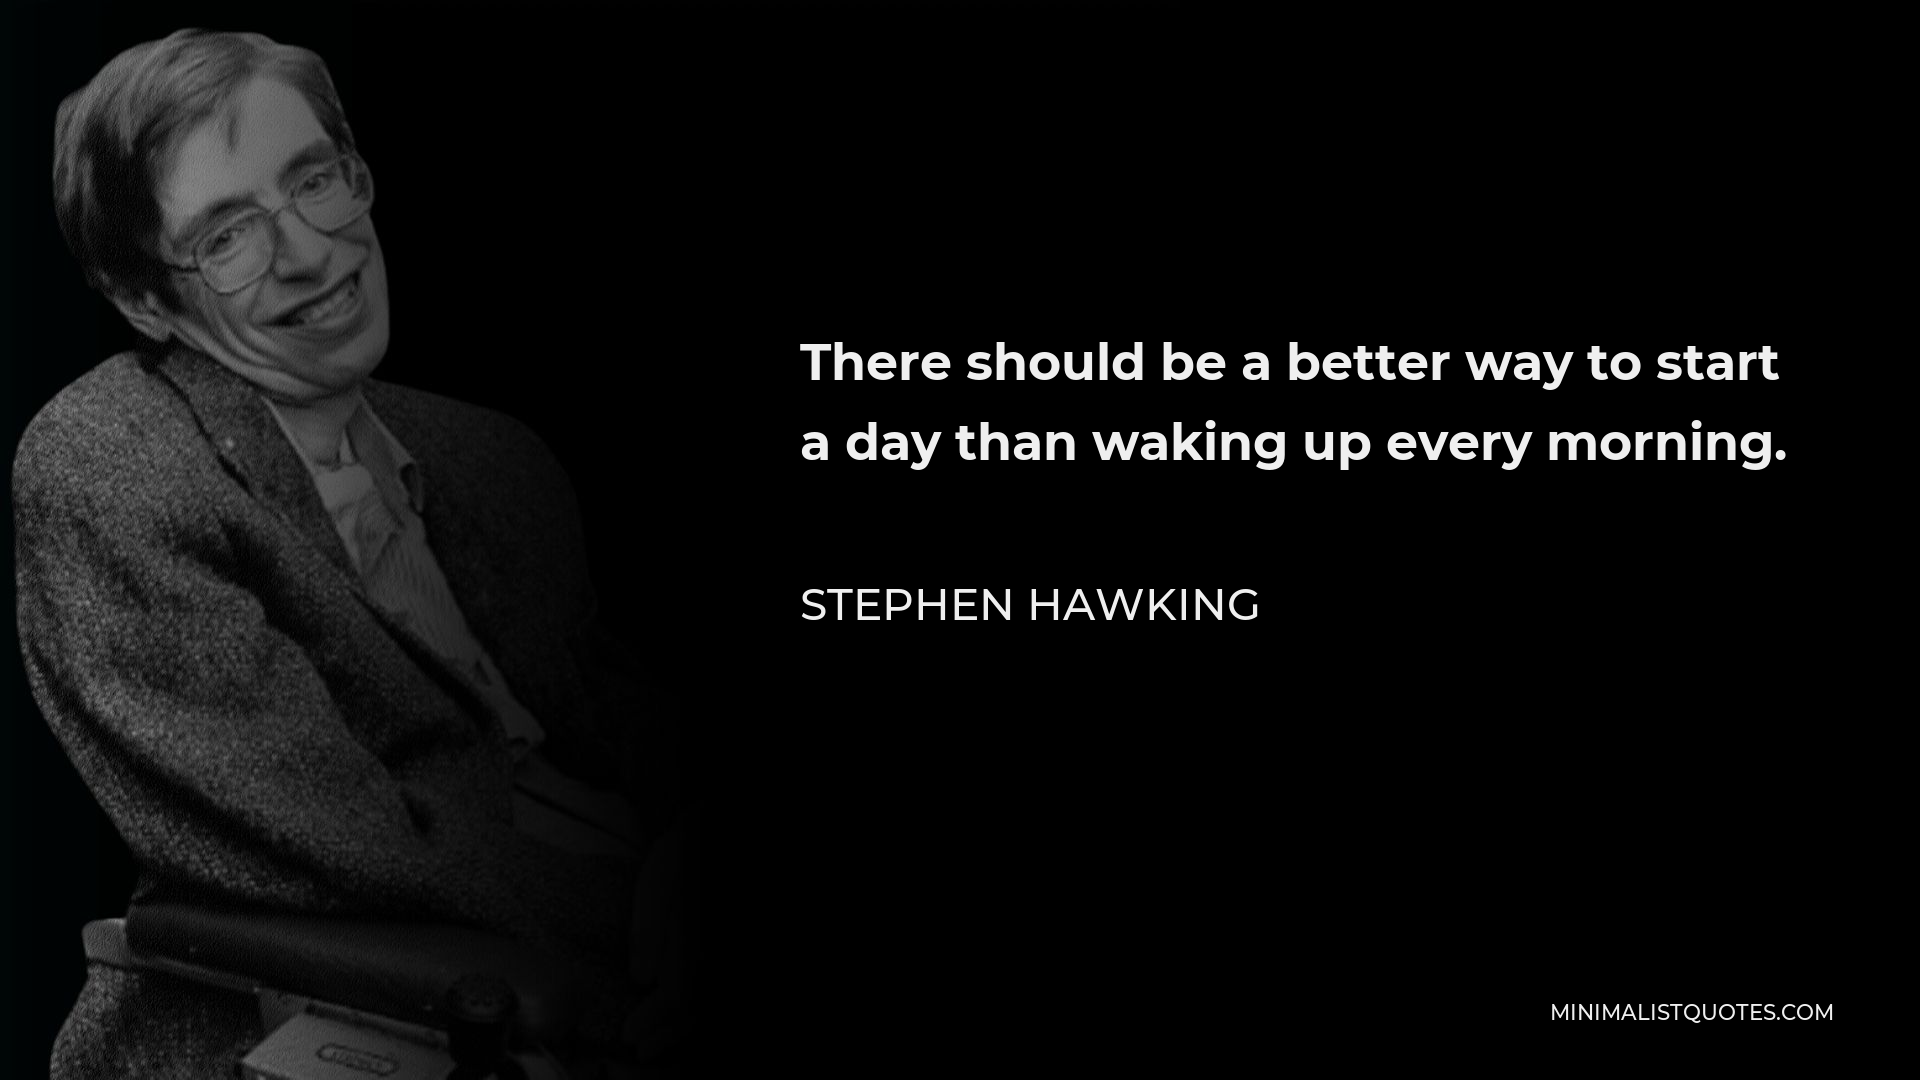 Stephen Hawking Quote - There should be a better way to start a day than waking up every morning.